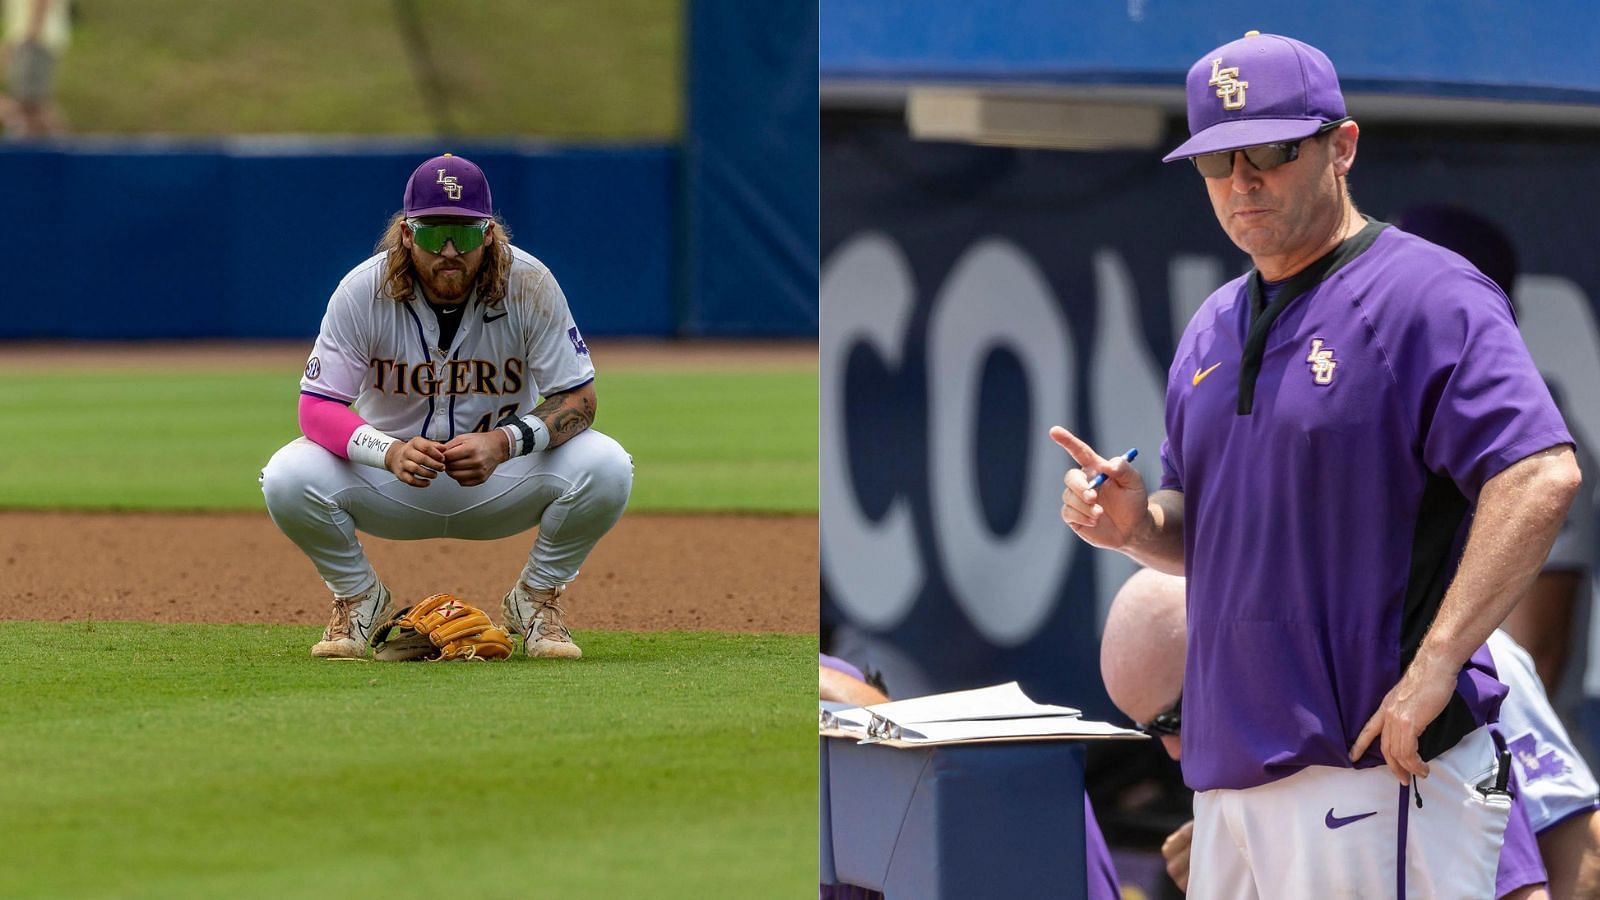 Third baseman Tommy White and coach Jay Johnson are two key factors for LSU